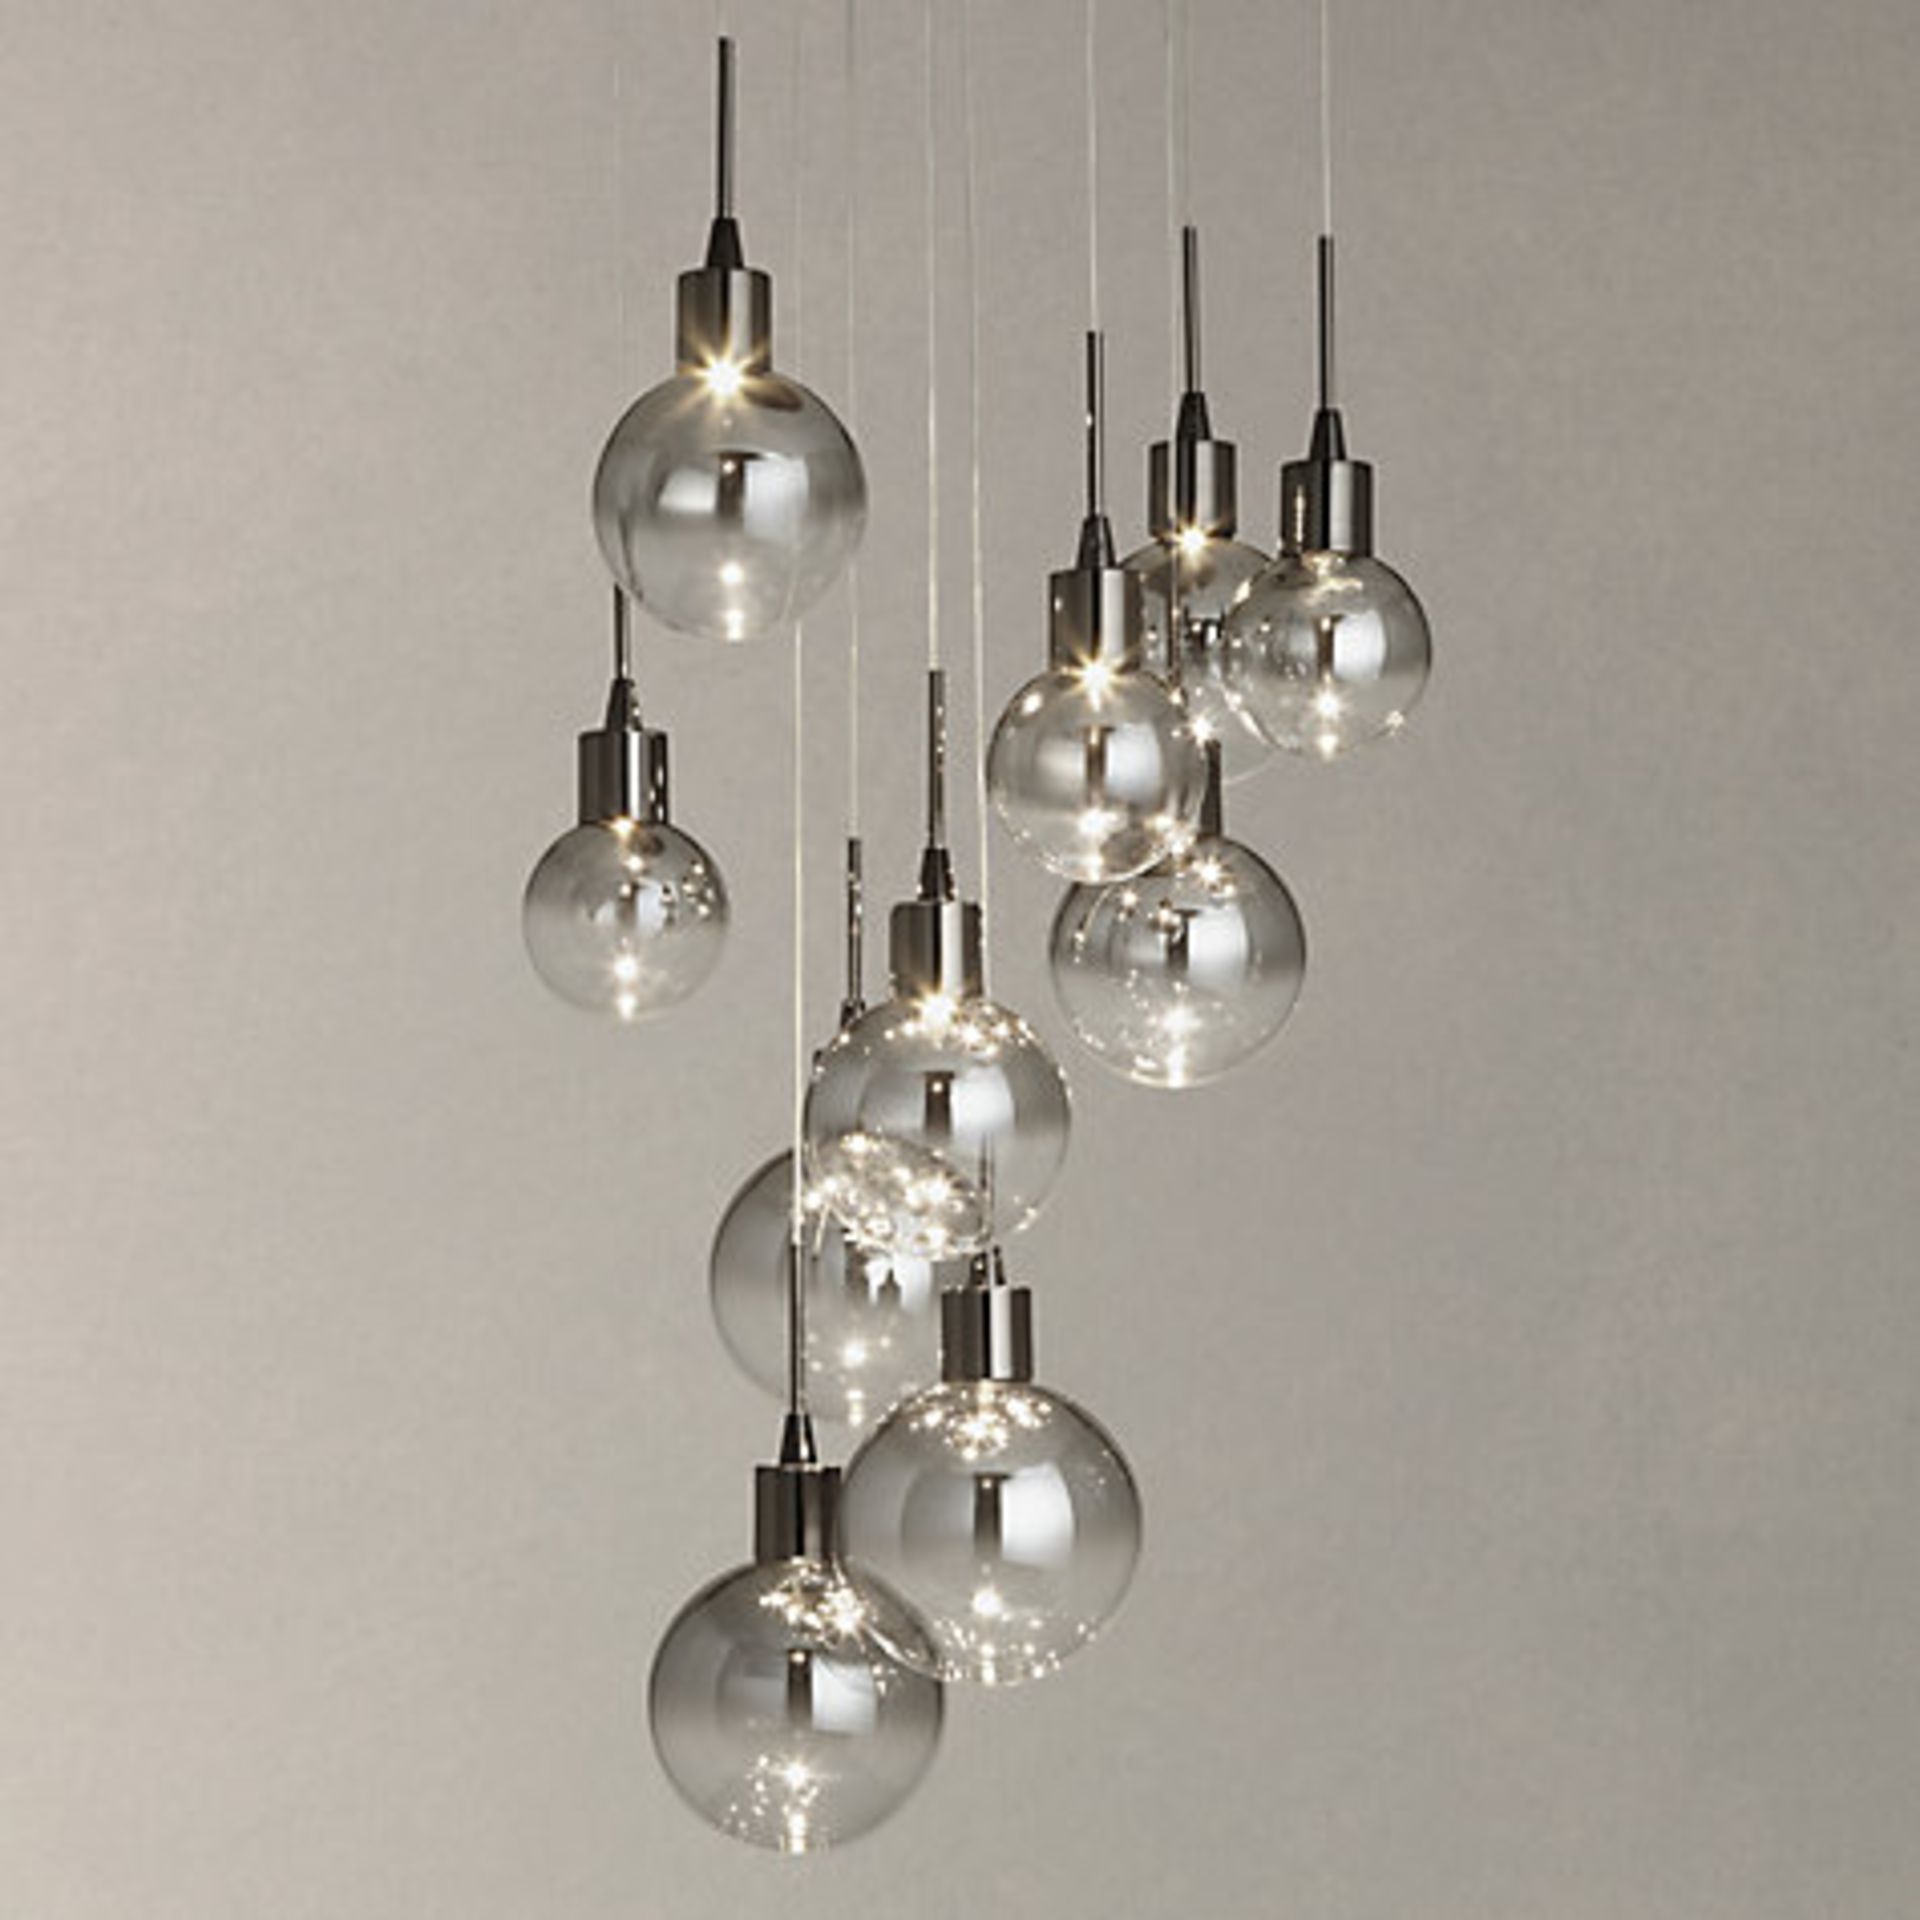 1 x BOXED DINO 10 LIGHT LED CEILING PENDANT WITH CHROME FINISH RRP £275 (16.10.17) (3808102) *PLEASE